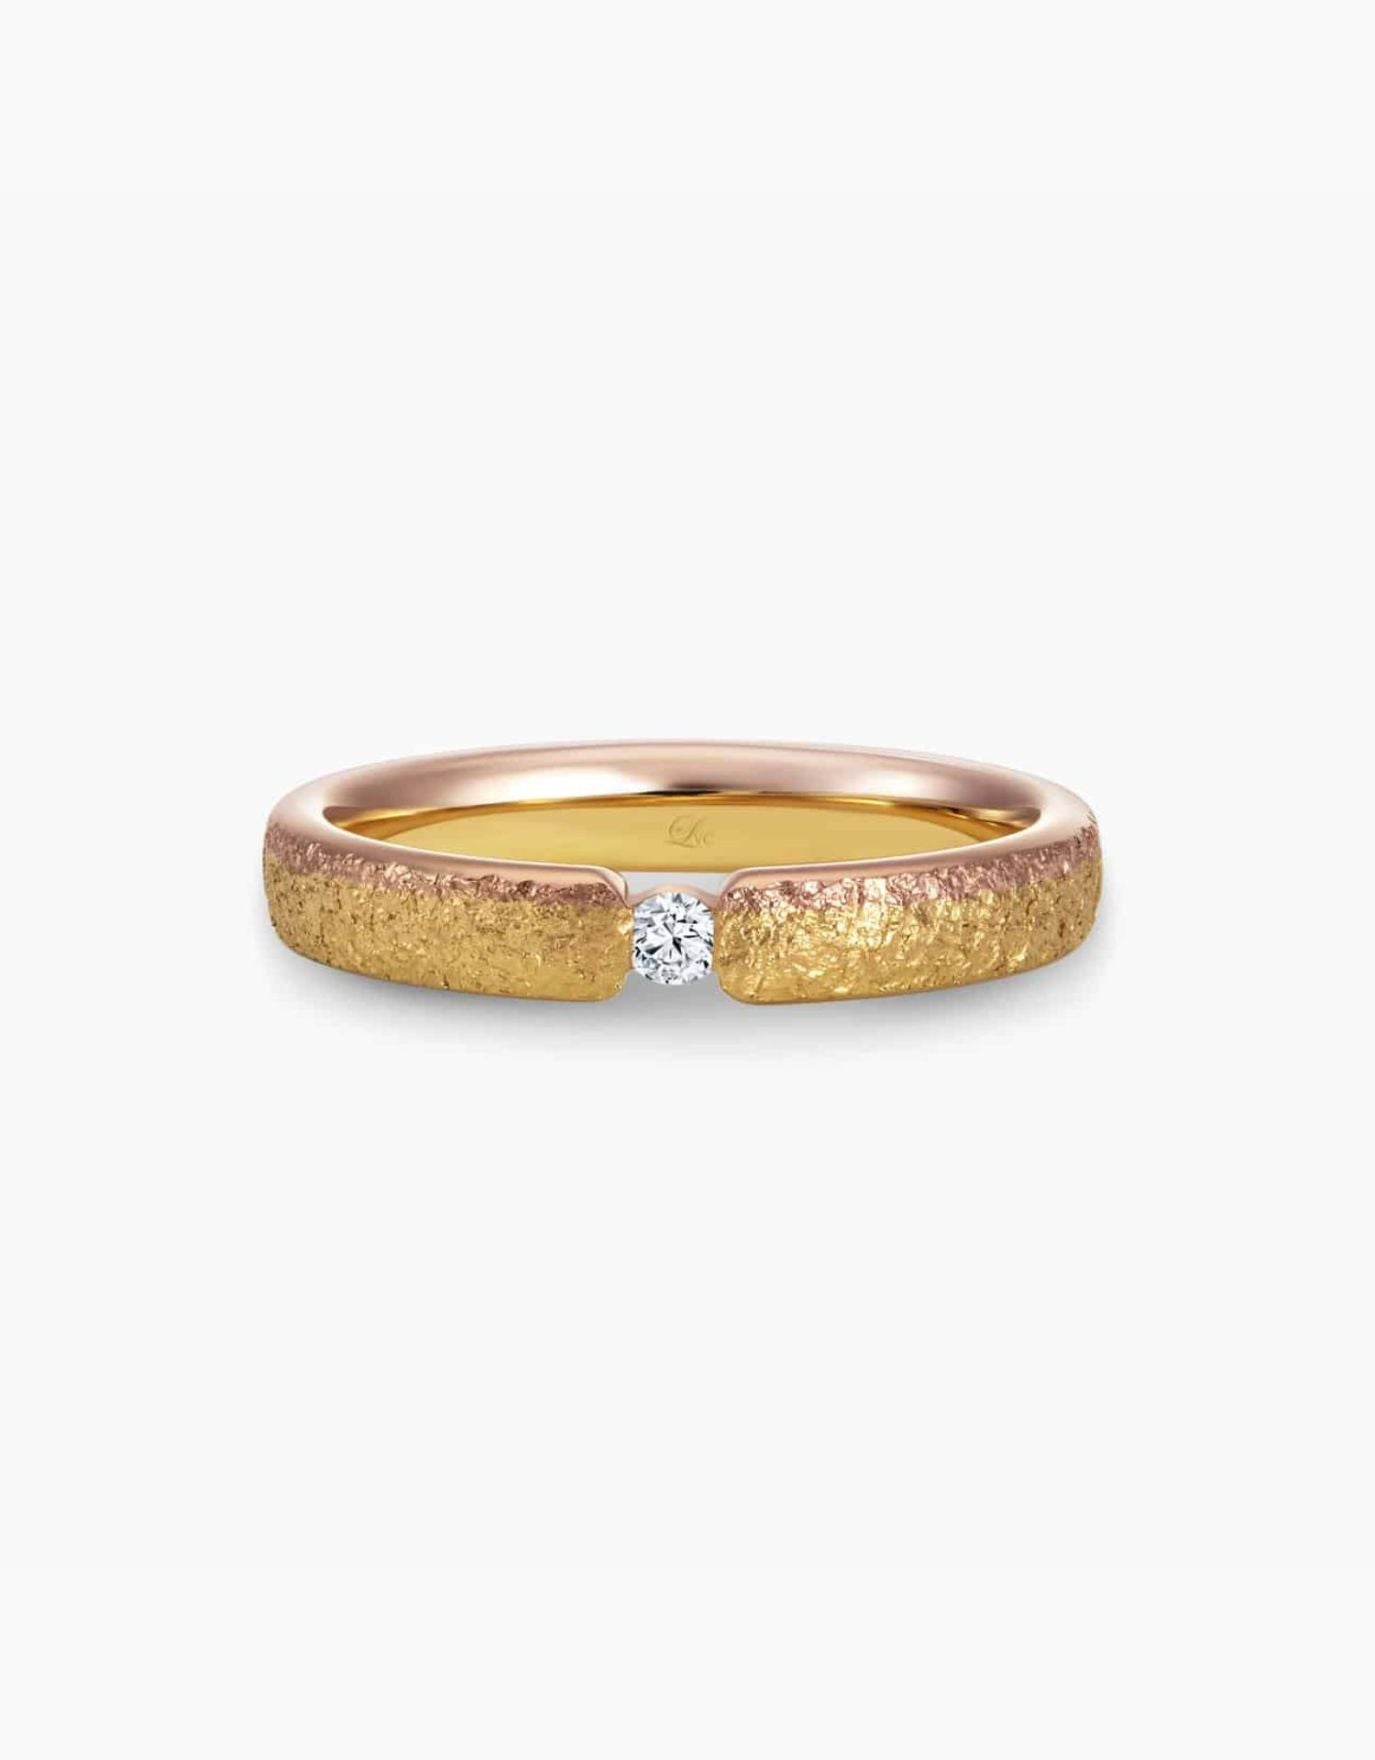 LVC Soleil Apollo Wedding Band in Matte Finish with Diamond in Tension Setting